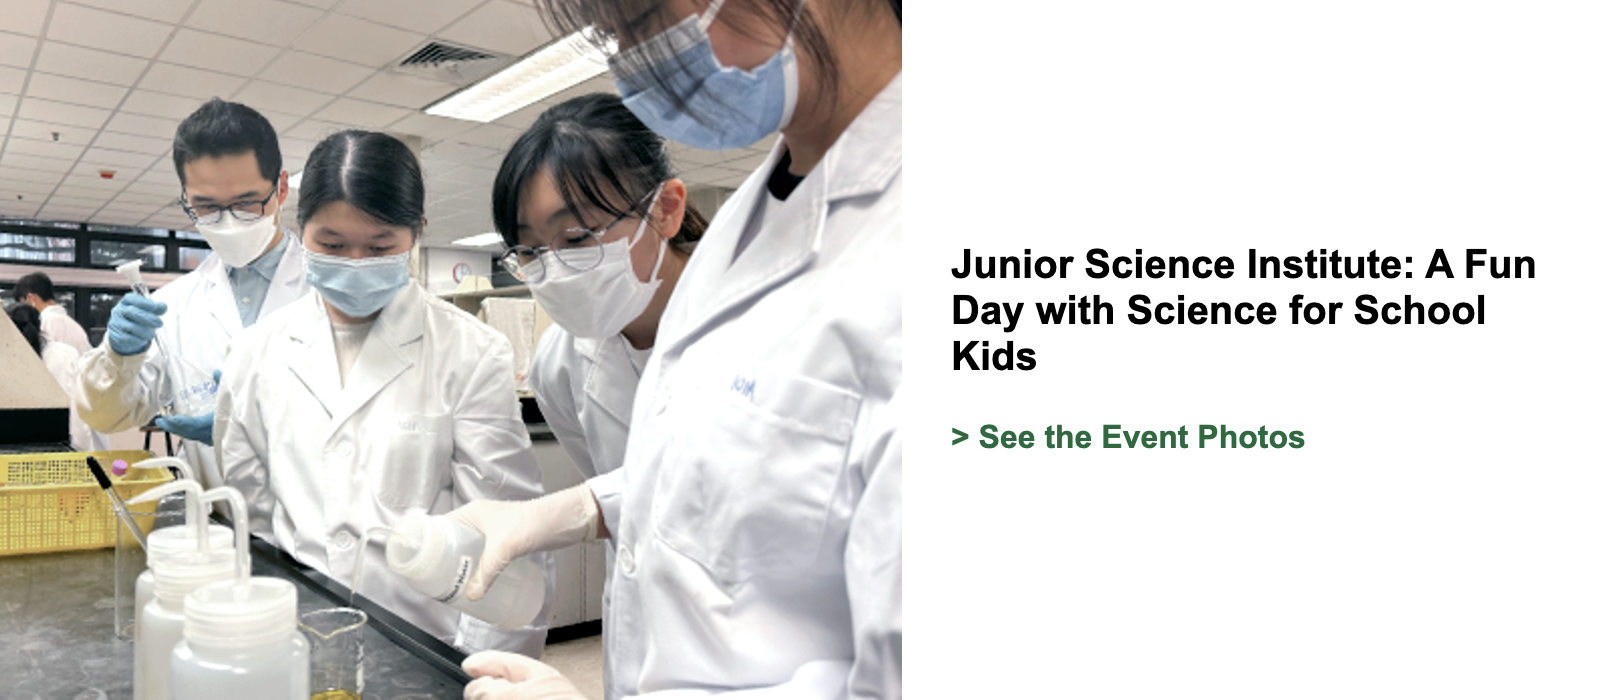 Junior Science Institute: A Fun Day with Science for School Kids